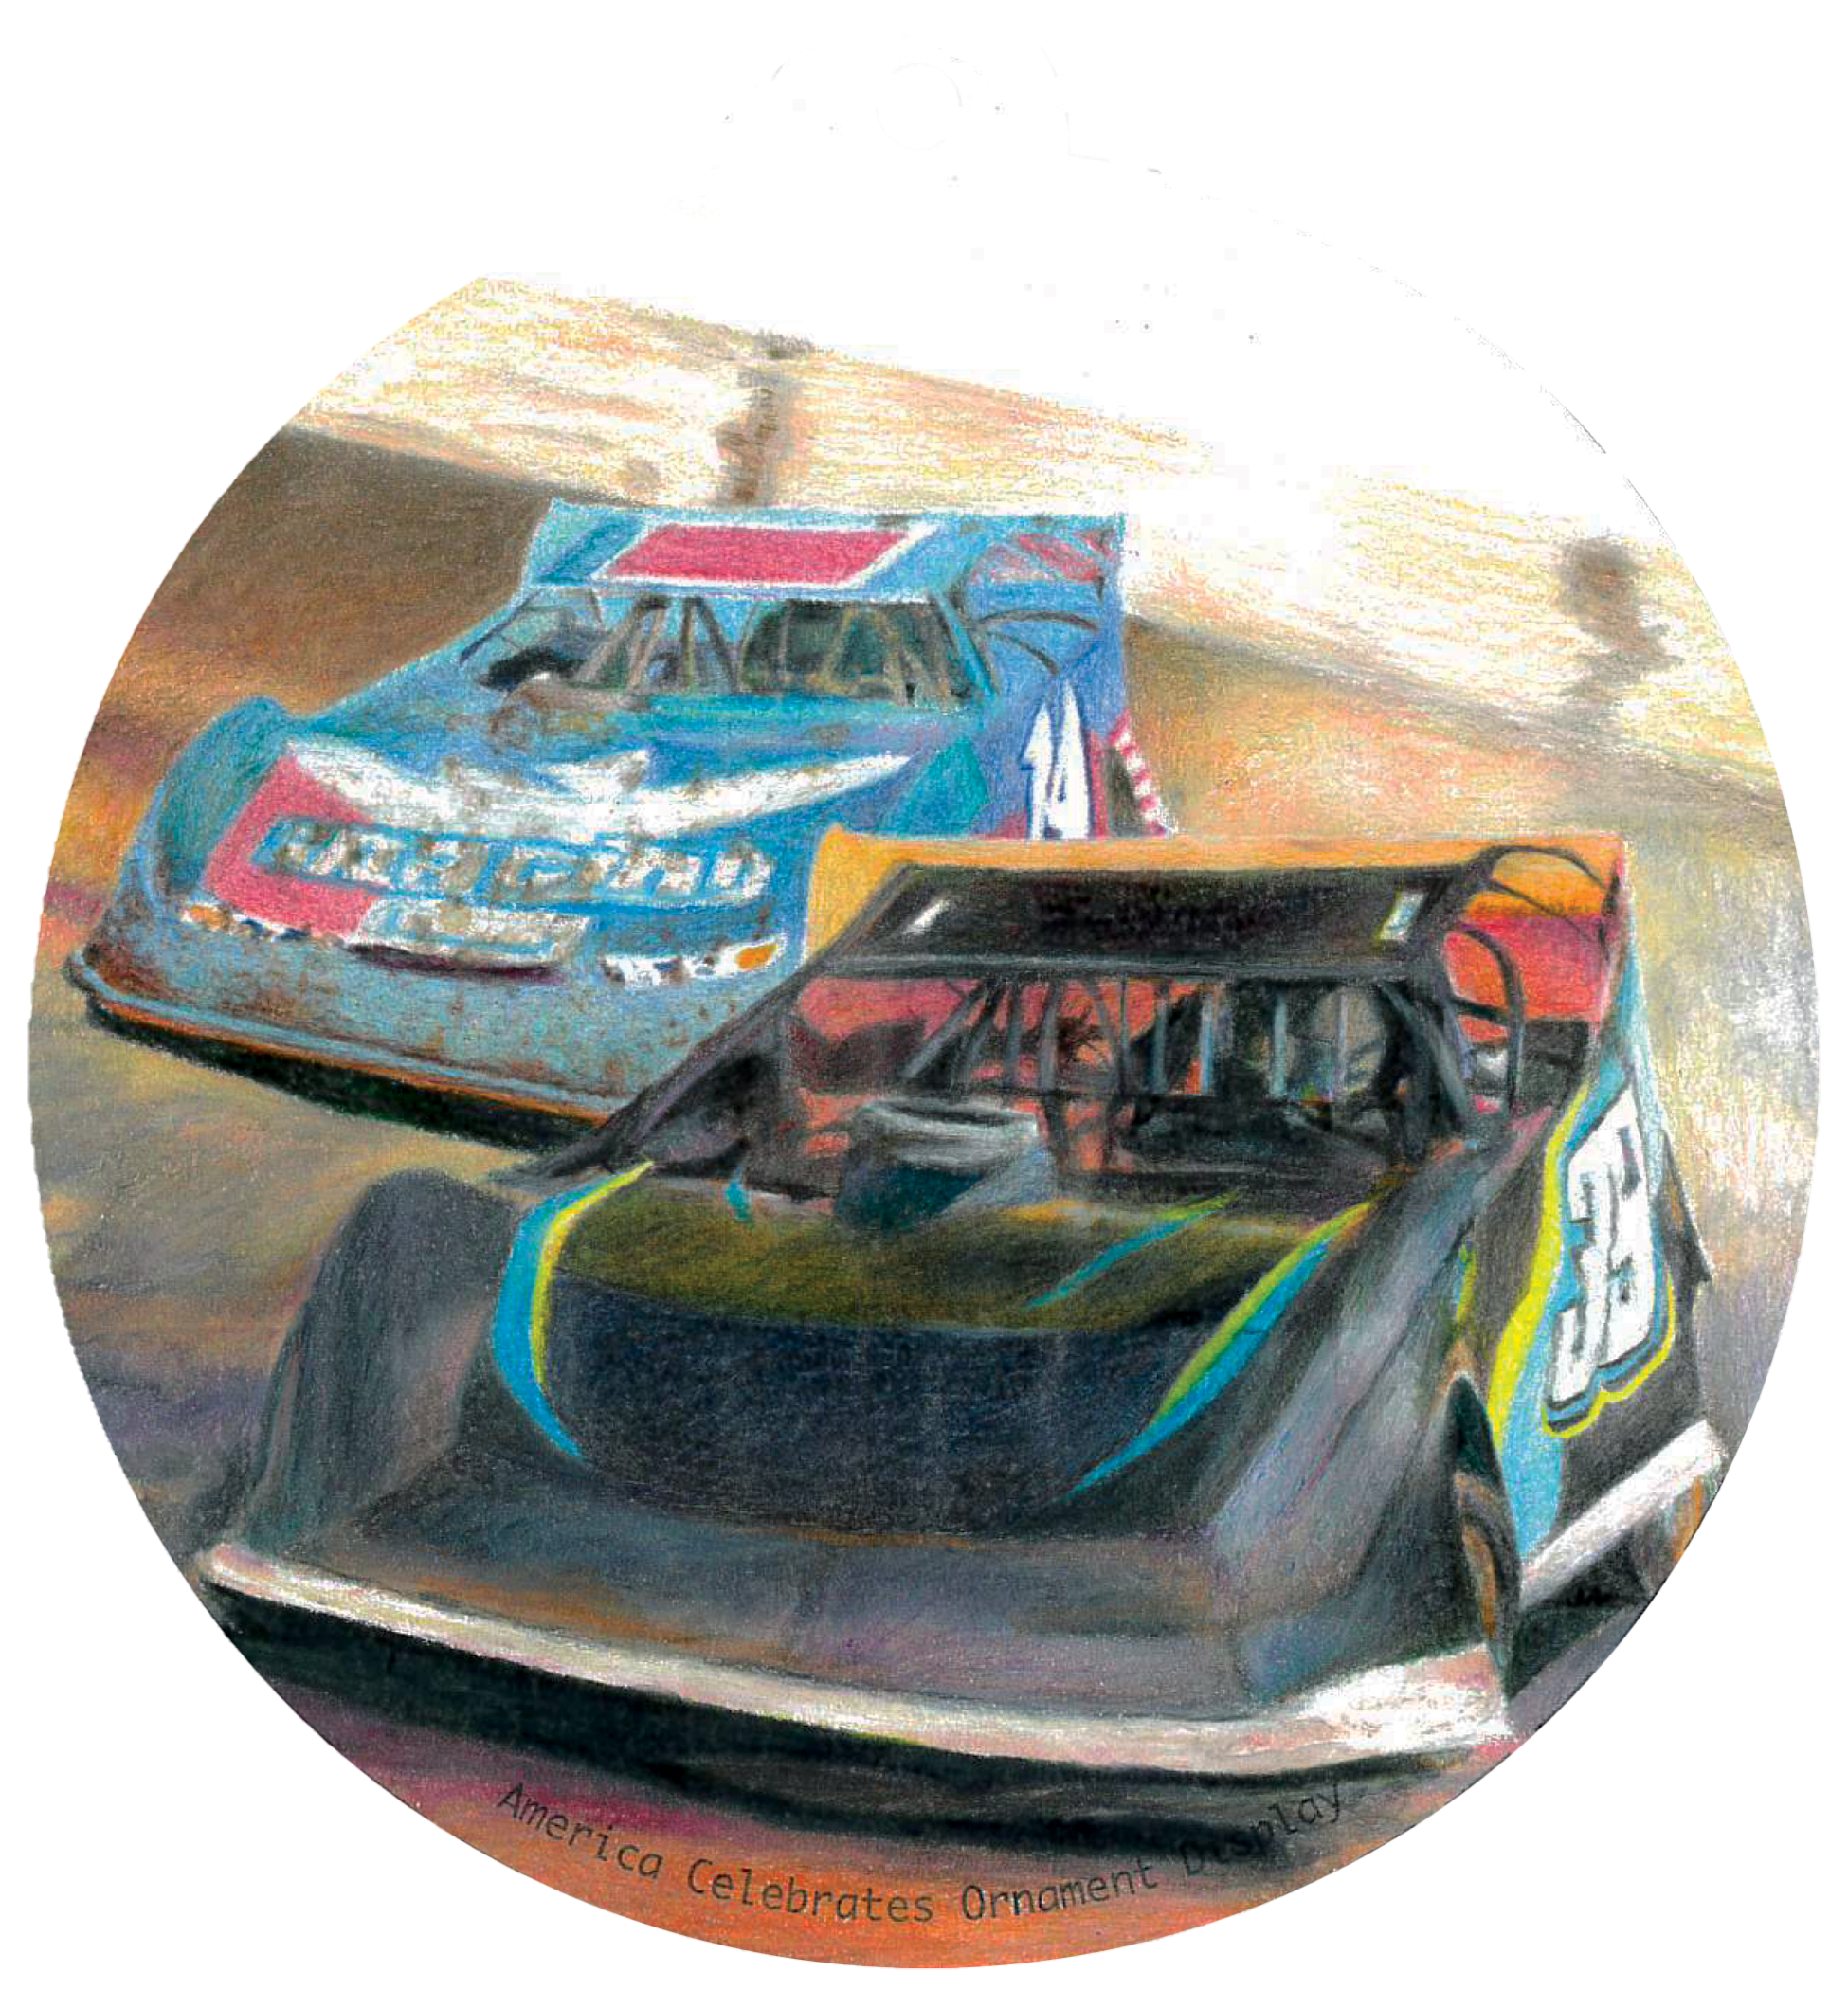 ornament depicting two nascar vehicles racing